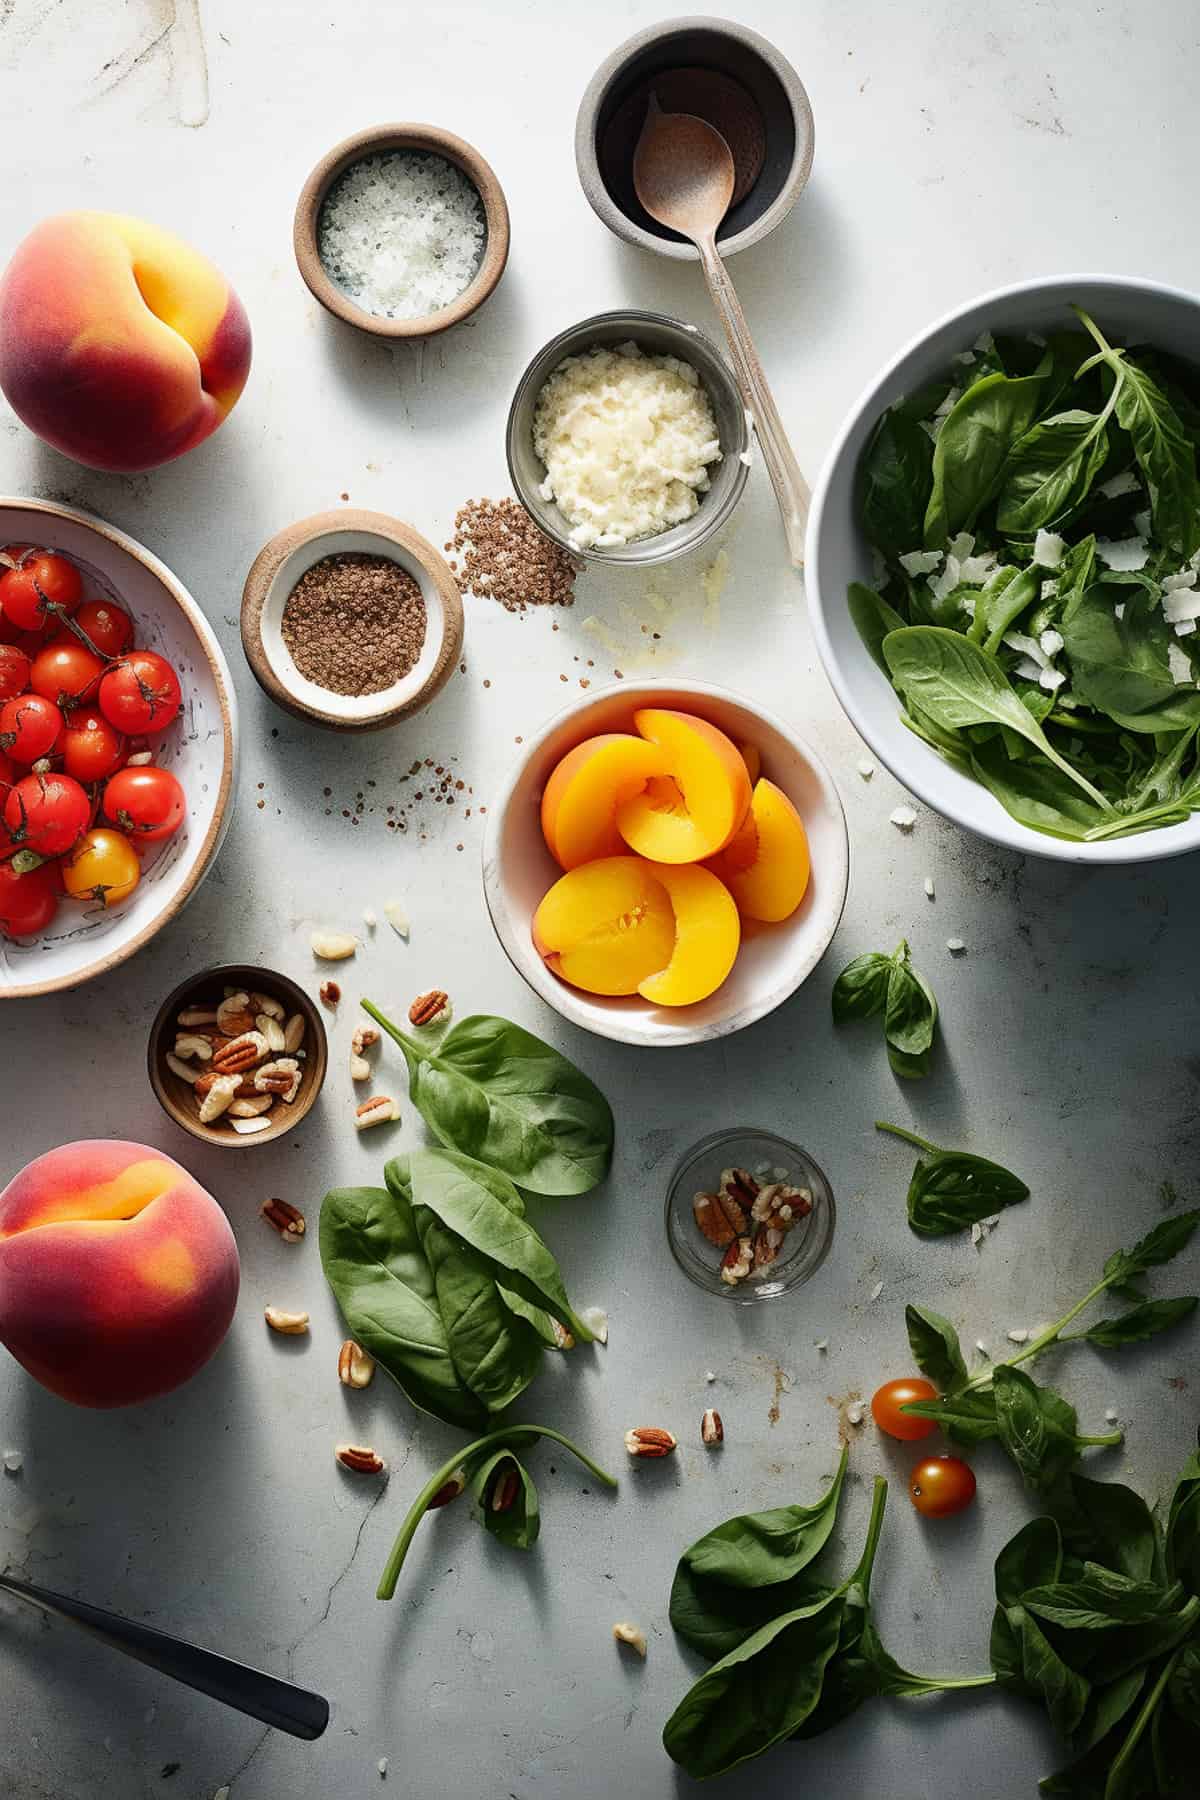 Ingredients for peach spinach salad with vinaigrette.